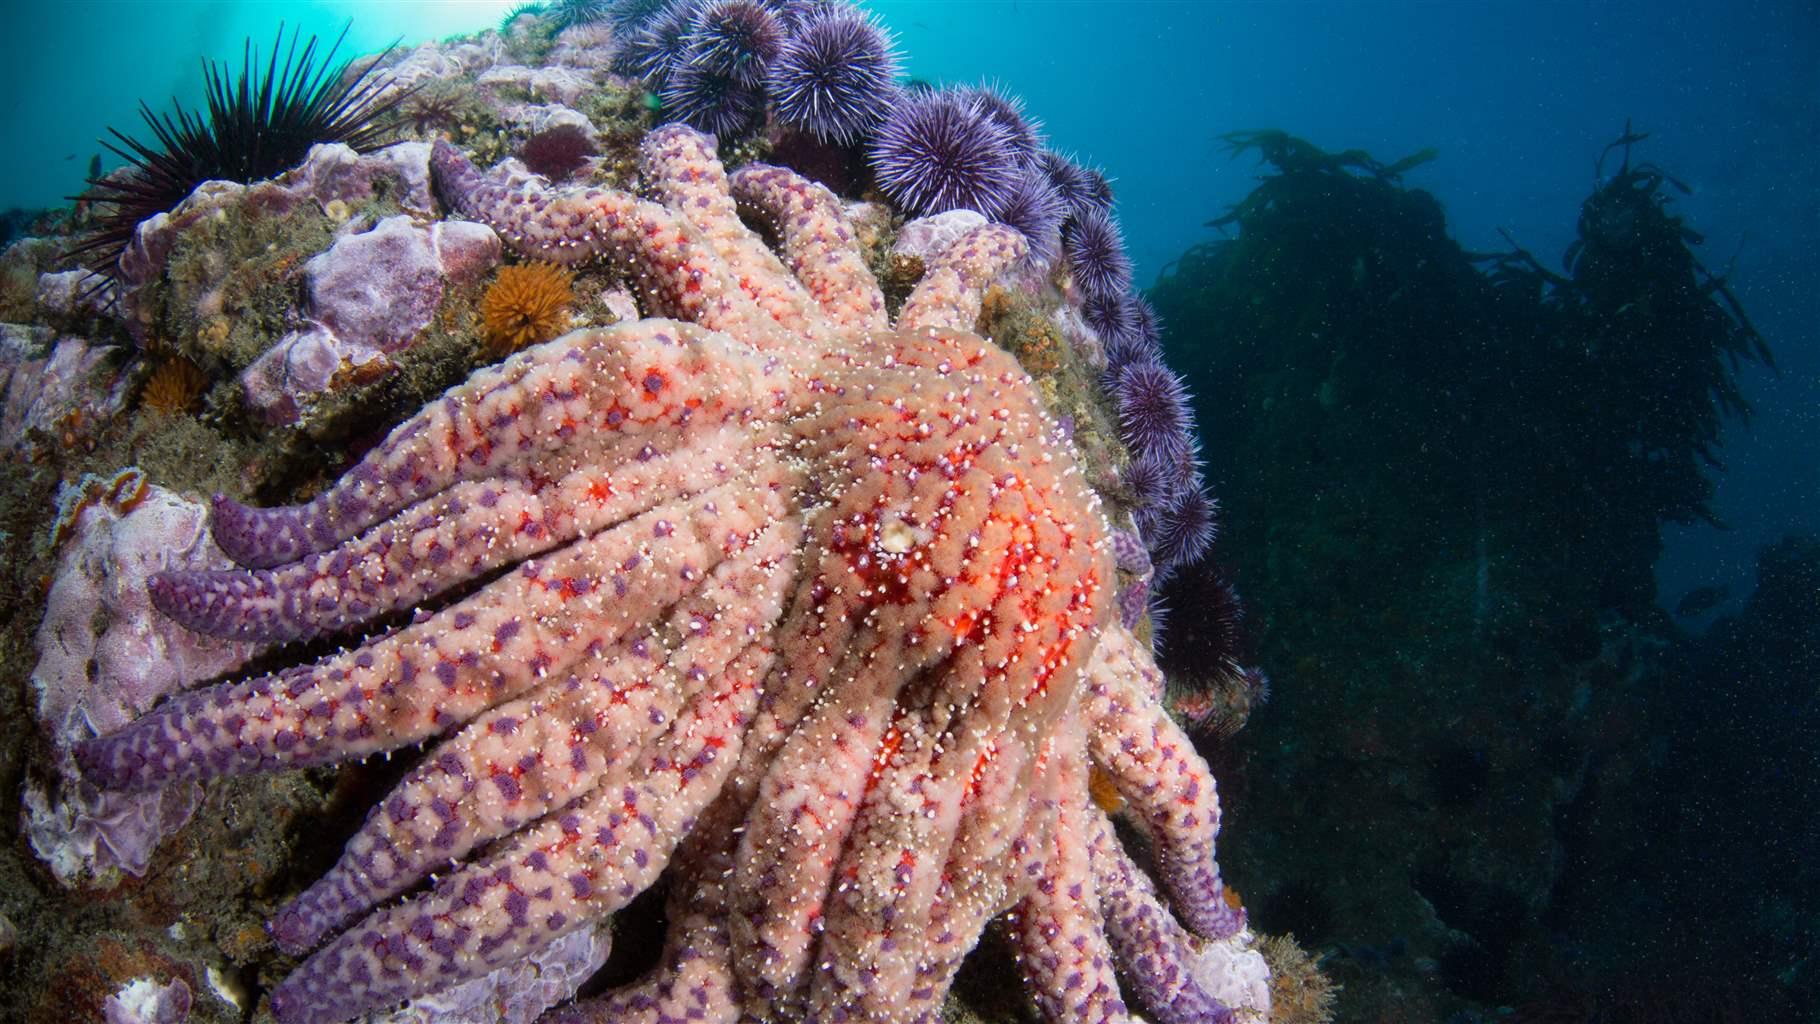 A large pink, orange, and purple sea star clings to a rock underwater, with more than a dozen purple urchins and one black urchin visible in the background. The water is clear and the sun is shining through it, illuminating the underwater scene. 